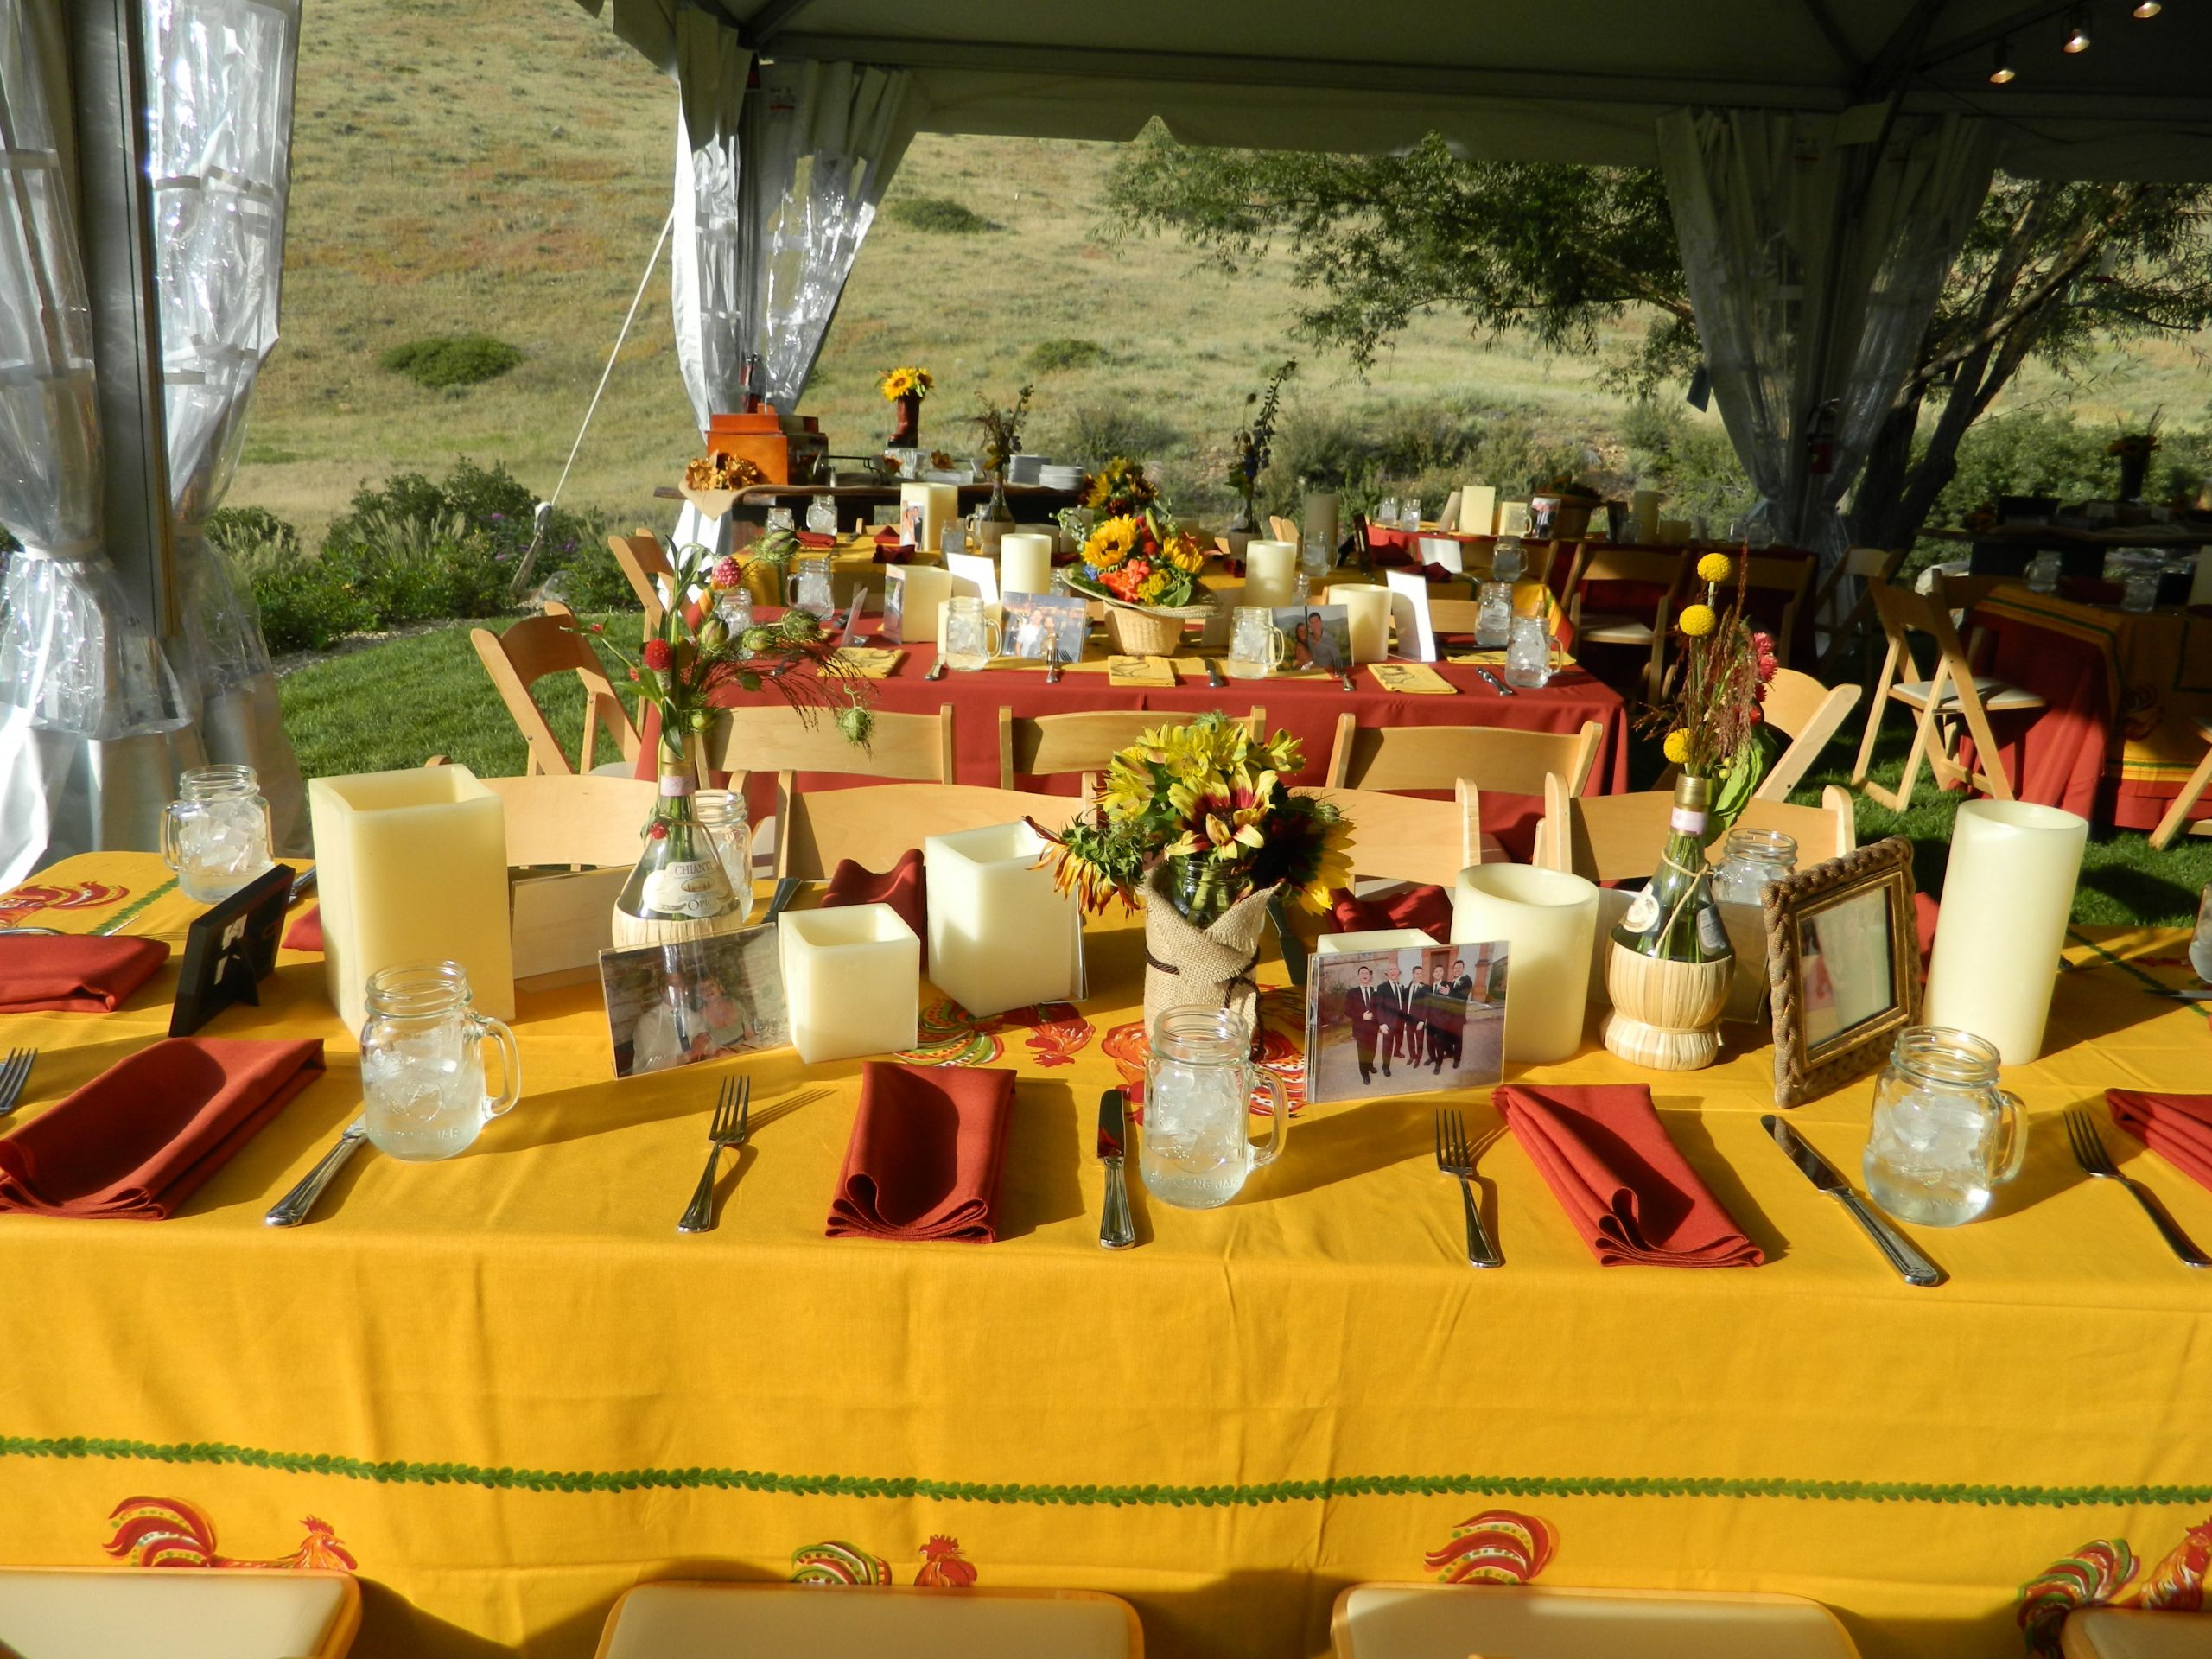 Dinner Party Entertainment Ideas For Adults
 western party theme ideas adults